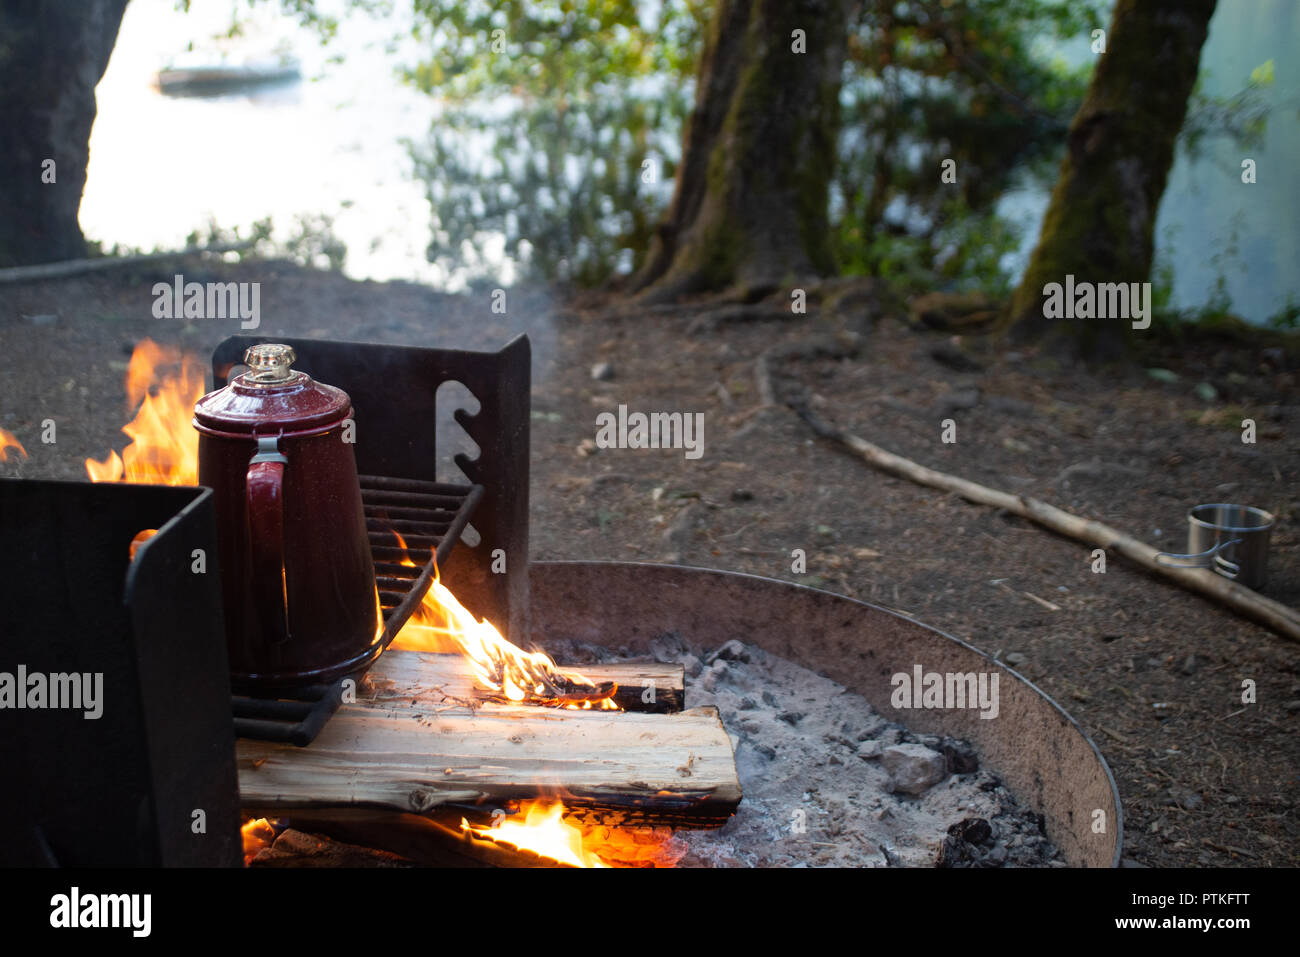 https://c8.alamy.com/comp/PTKFTT/enjoying-a-cup-of-coffee-over-a-campfire-in-the-early-morning-at-sunrise-while-camping-at-lake-crescent-in-washington-PTKFTT.jpg